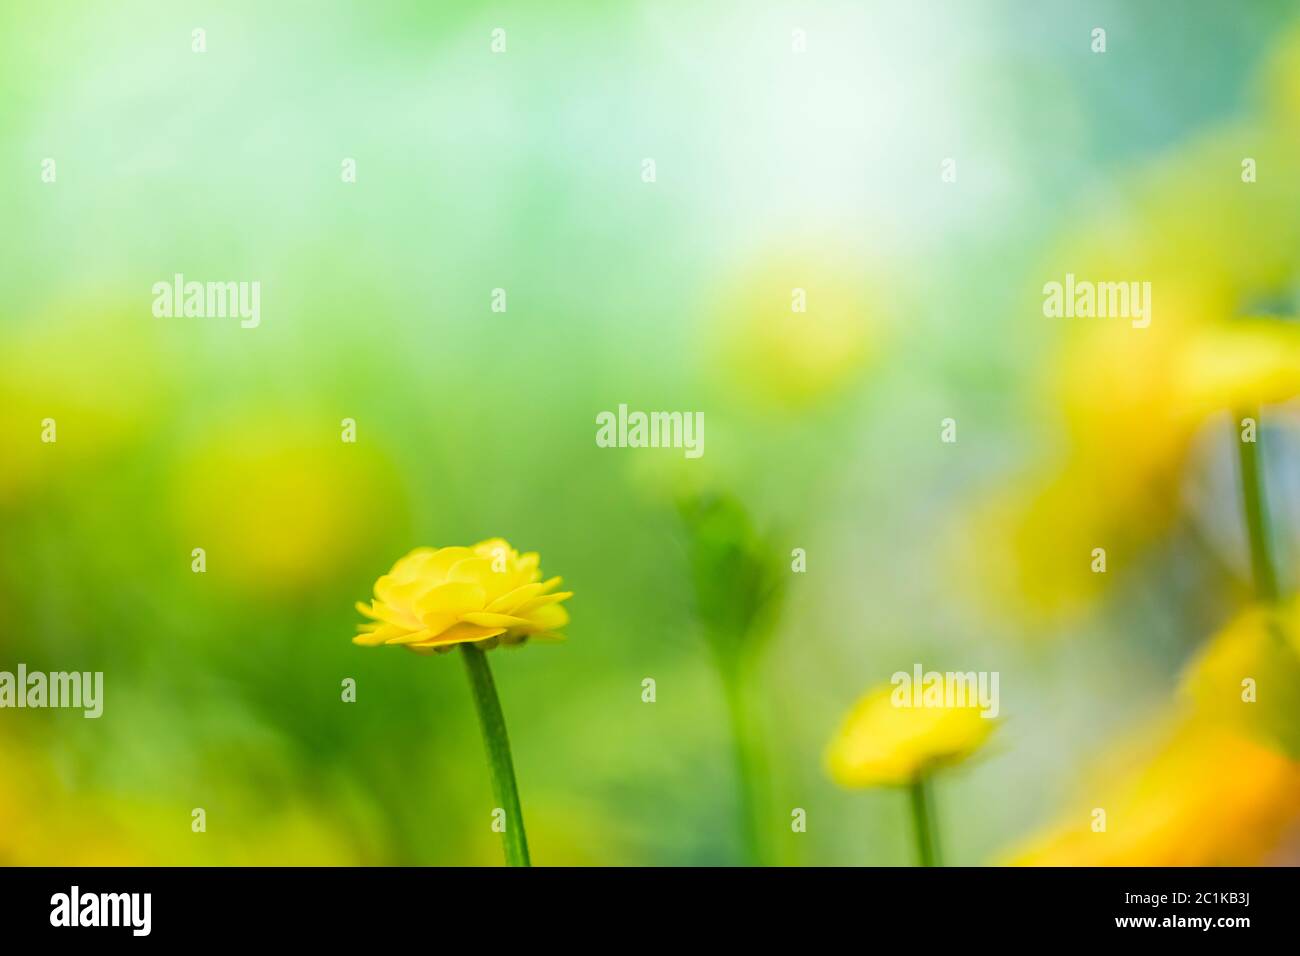 Yellow spring flowers on green background Stock Photo